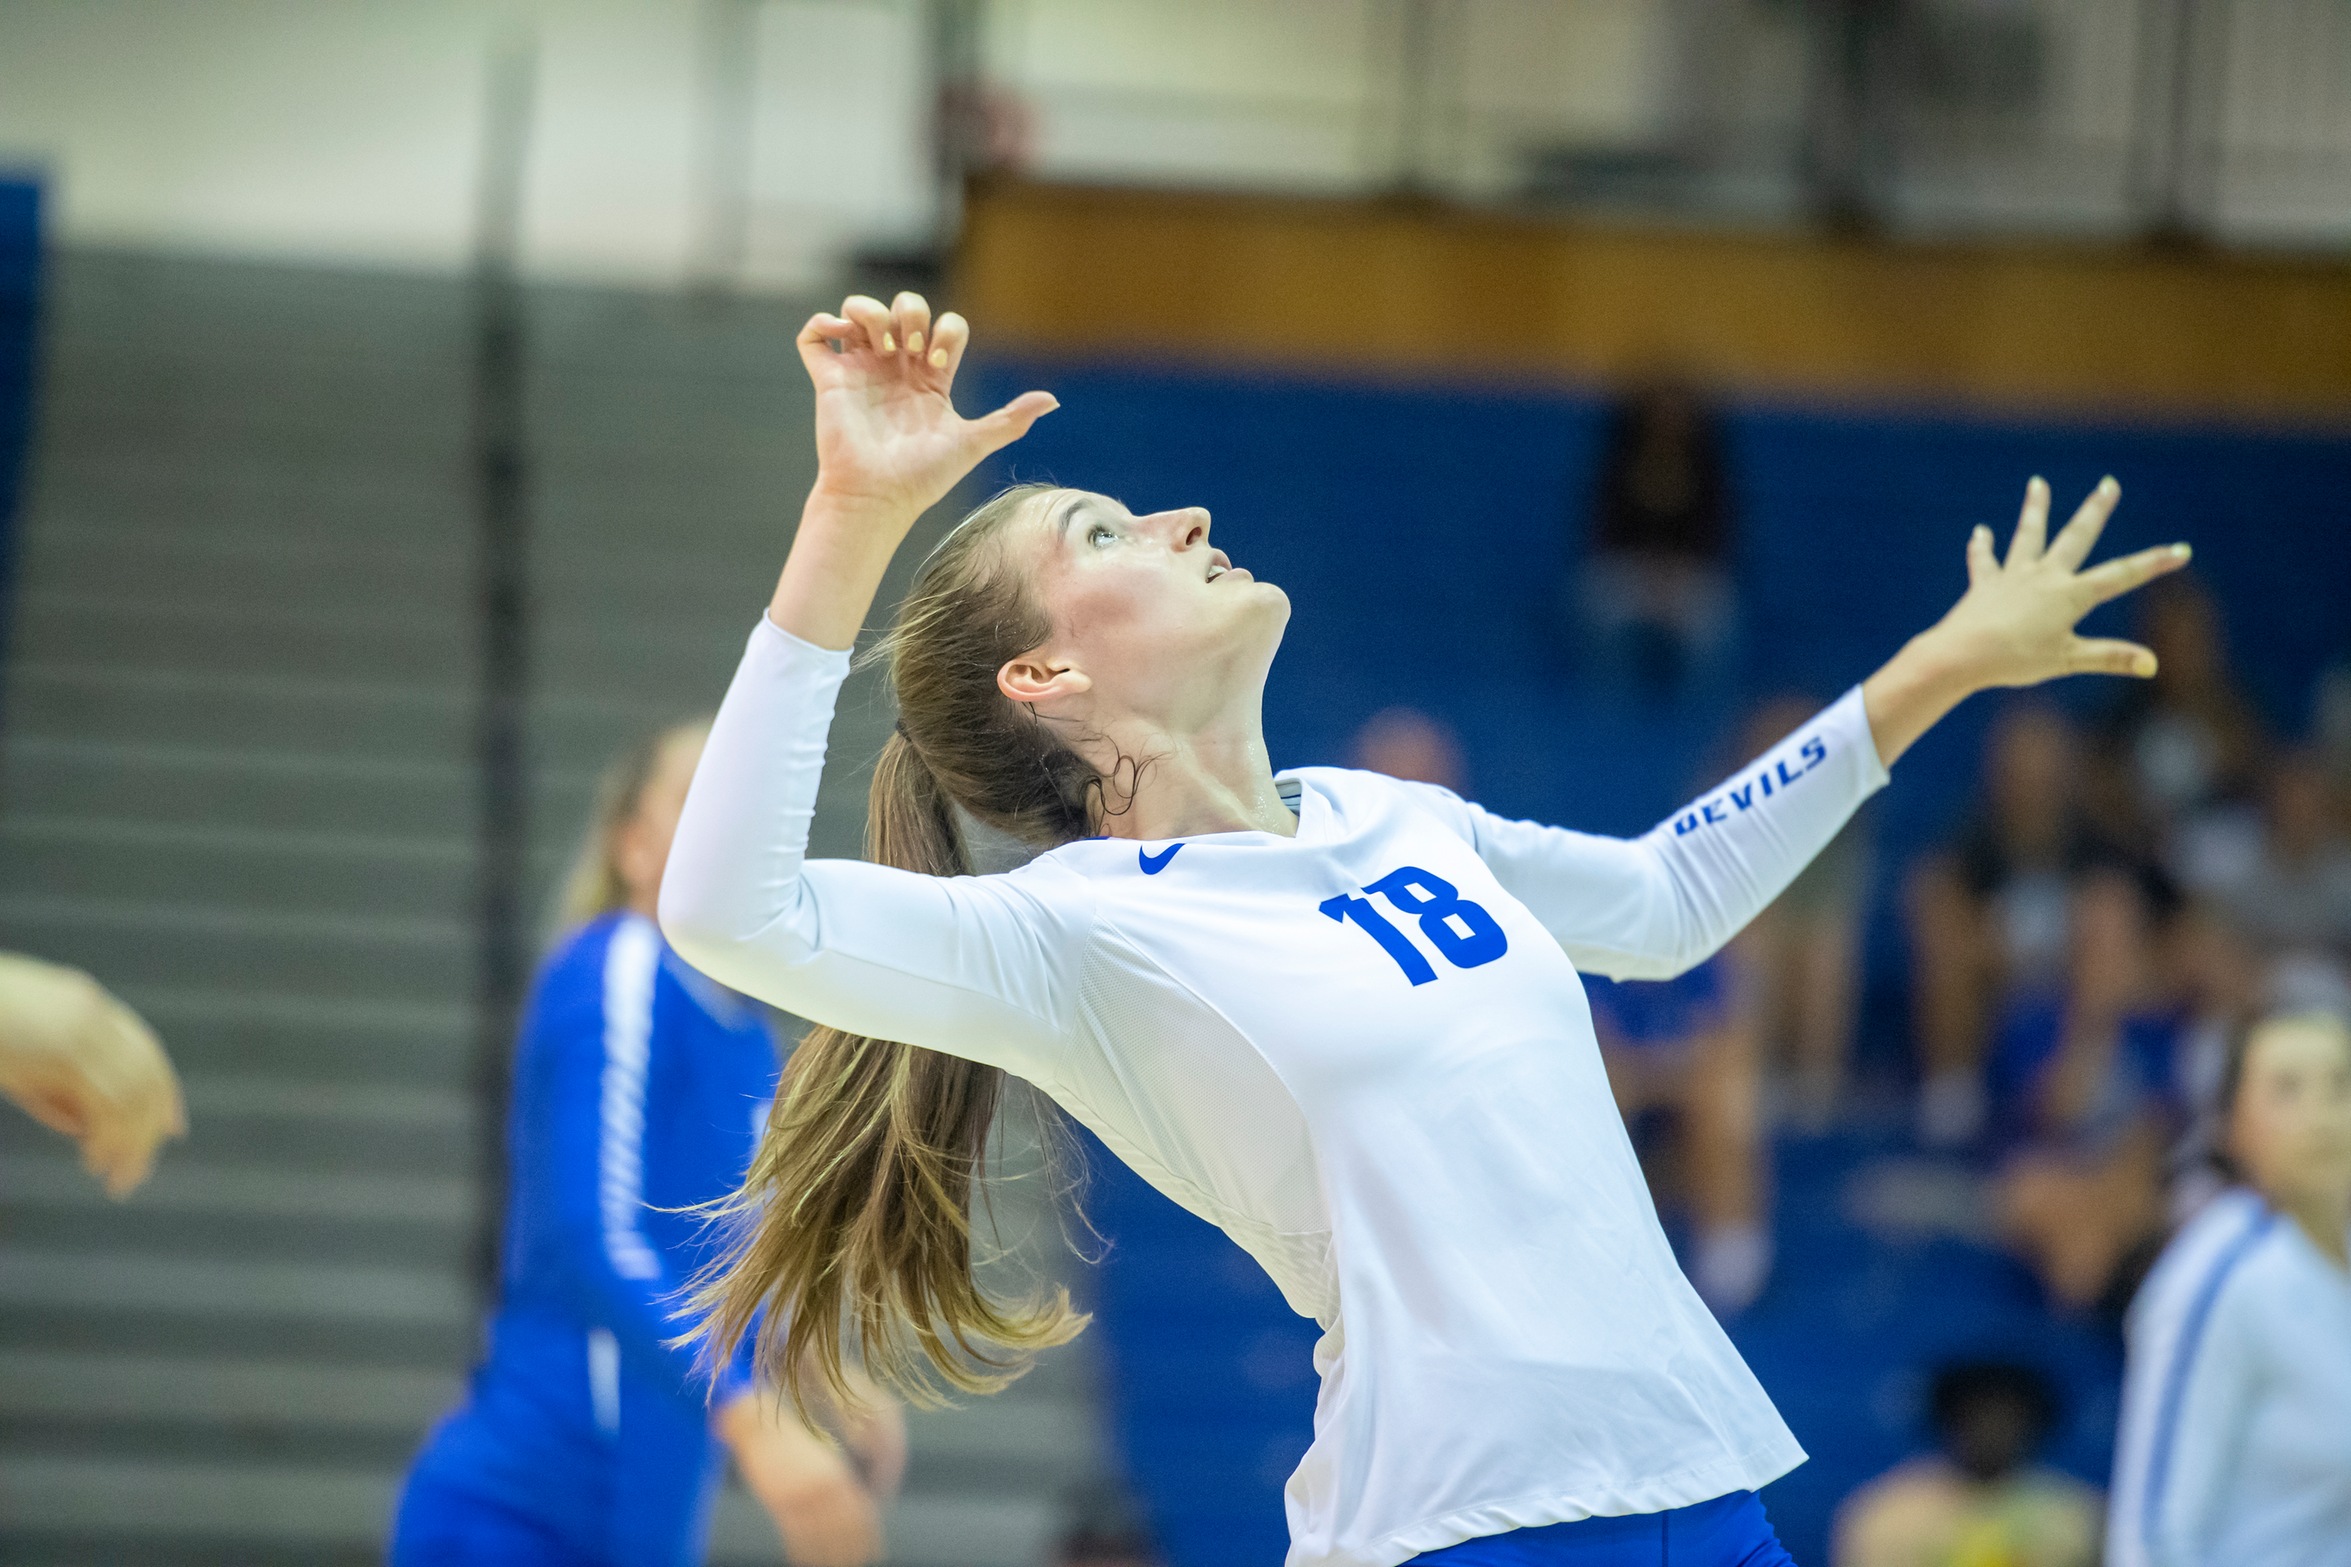 Volleyball Win Streak Ends in Loss at Seton Hall on Friday